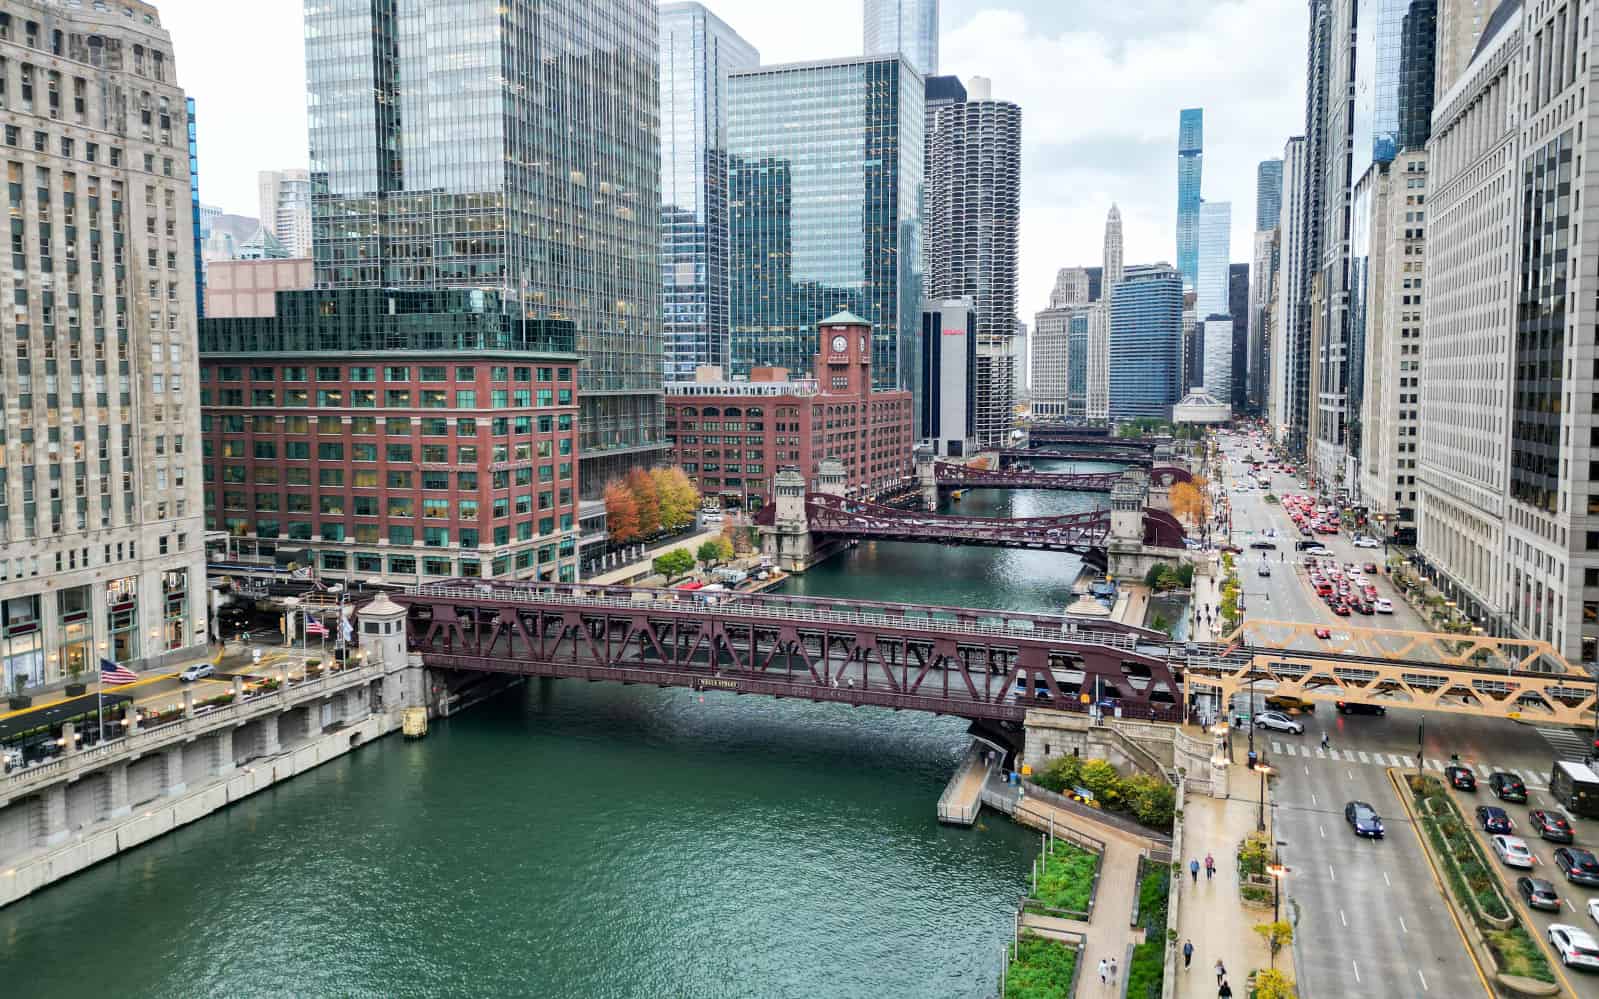 Overhead view of Chicago River and its bridges and neighboring skyscrapers looking east, with Wells Street Bridge centered